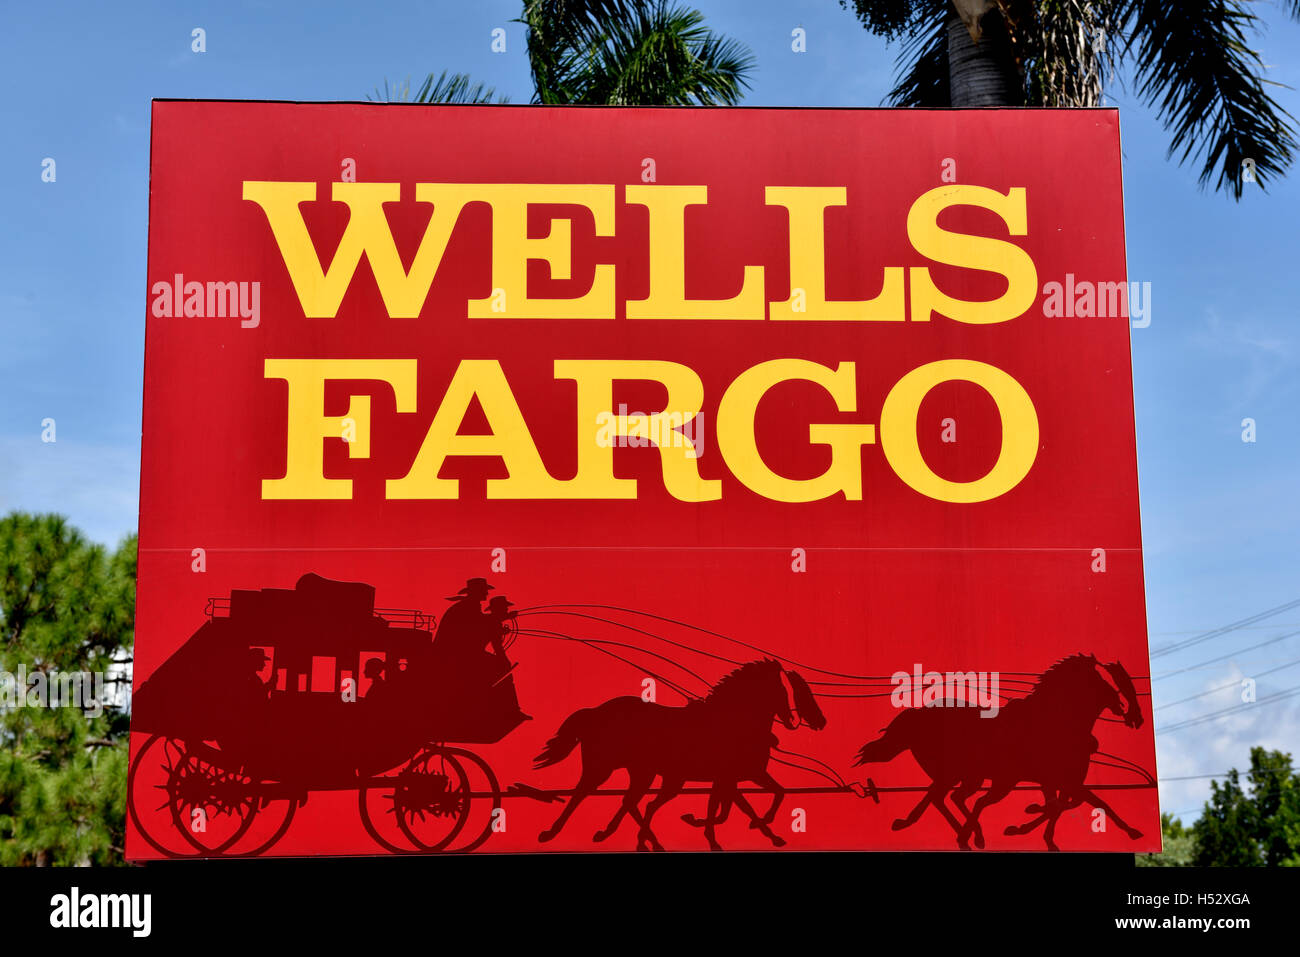 Wells Fargo Bank sign in front of palm trees Stock Photo